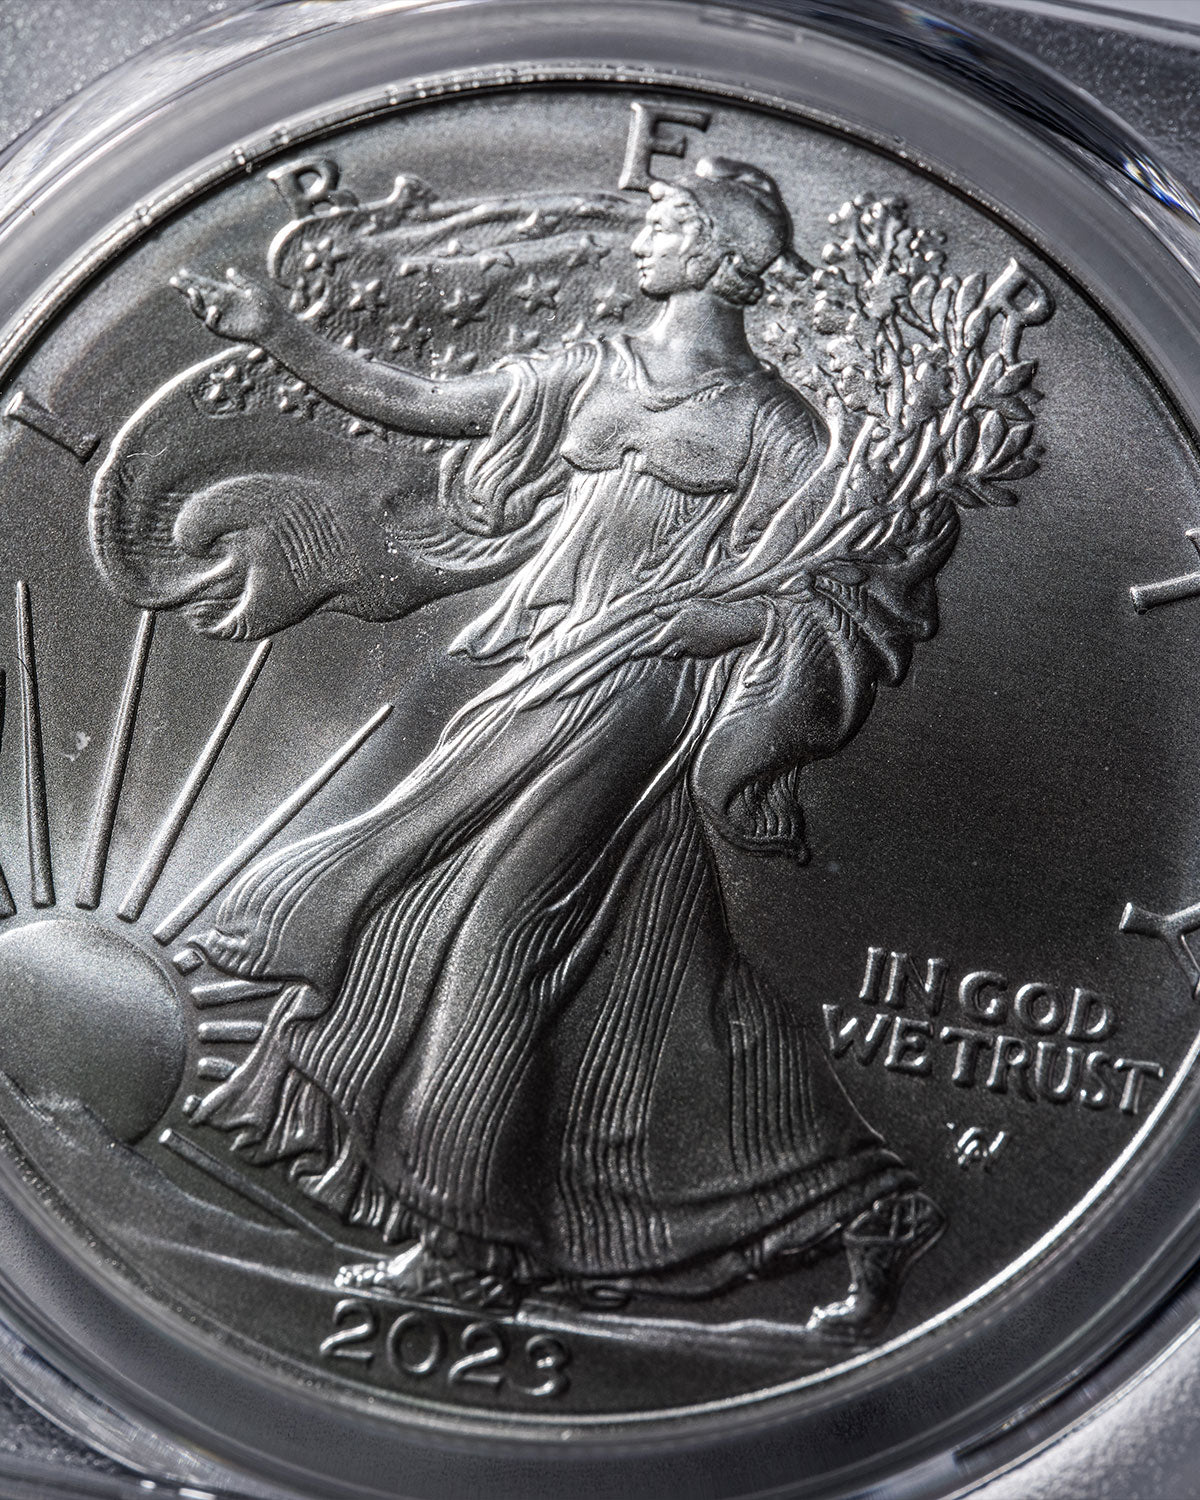 2023 $1 Silver Eagle | First Day of Issue MS70 PCGS | Stephanie Sabin Autographed